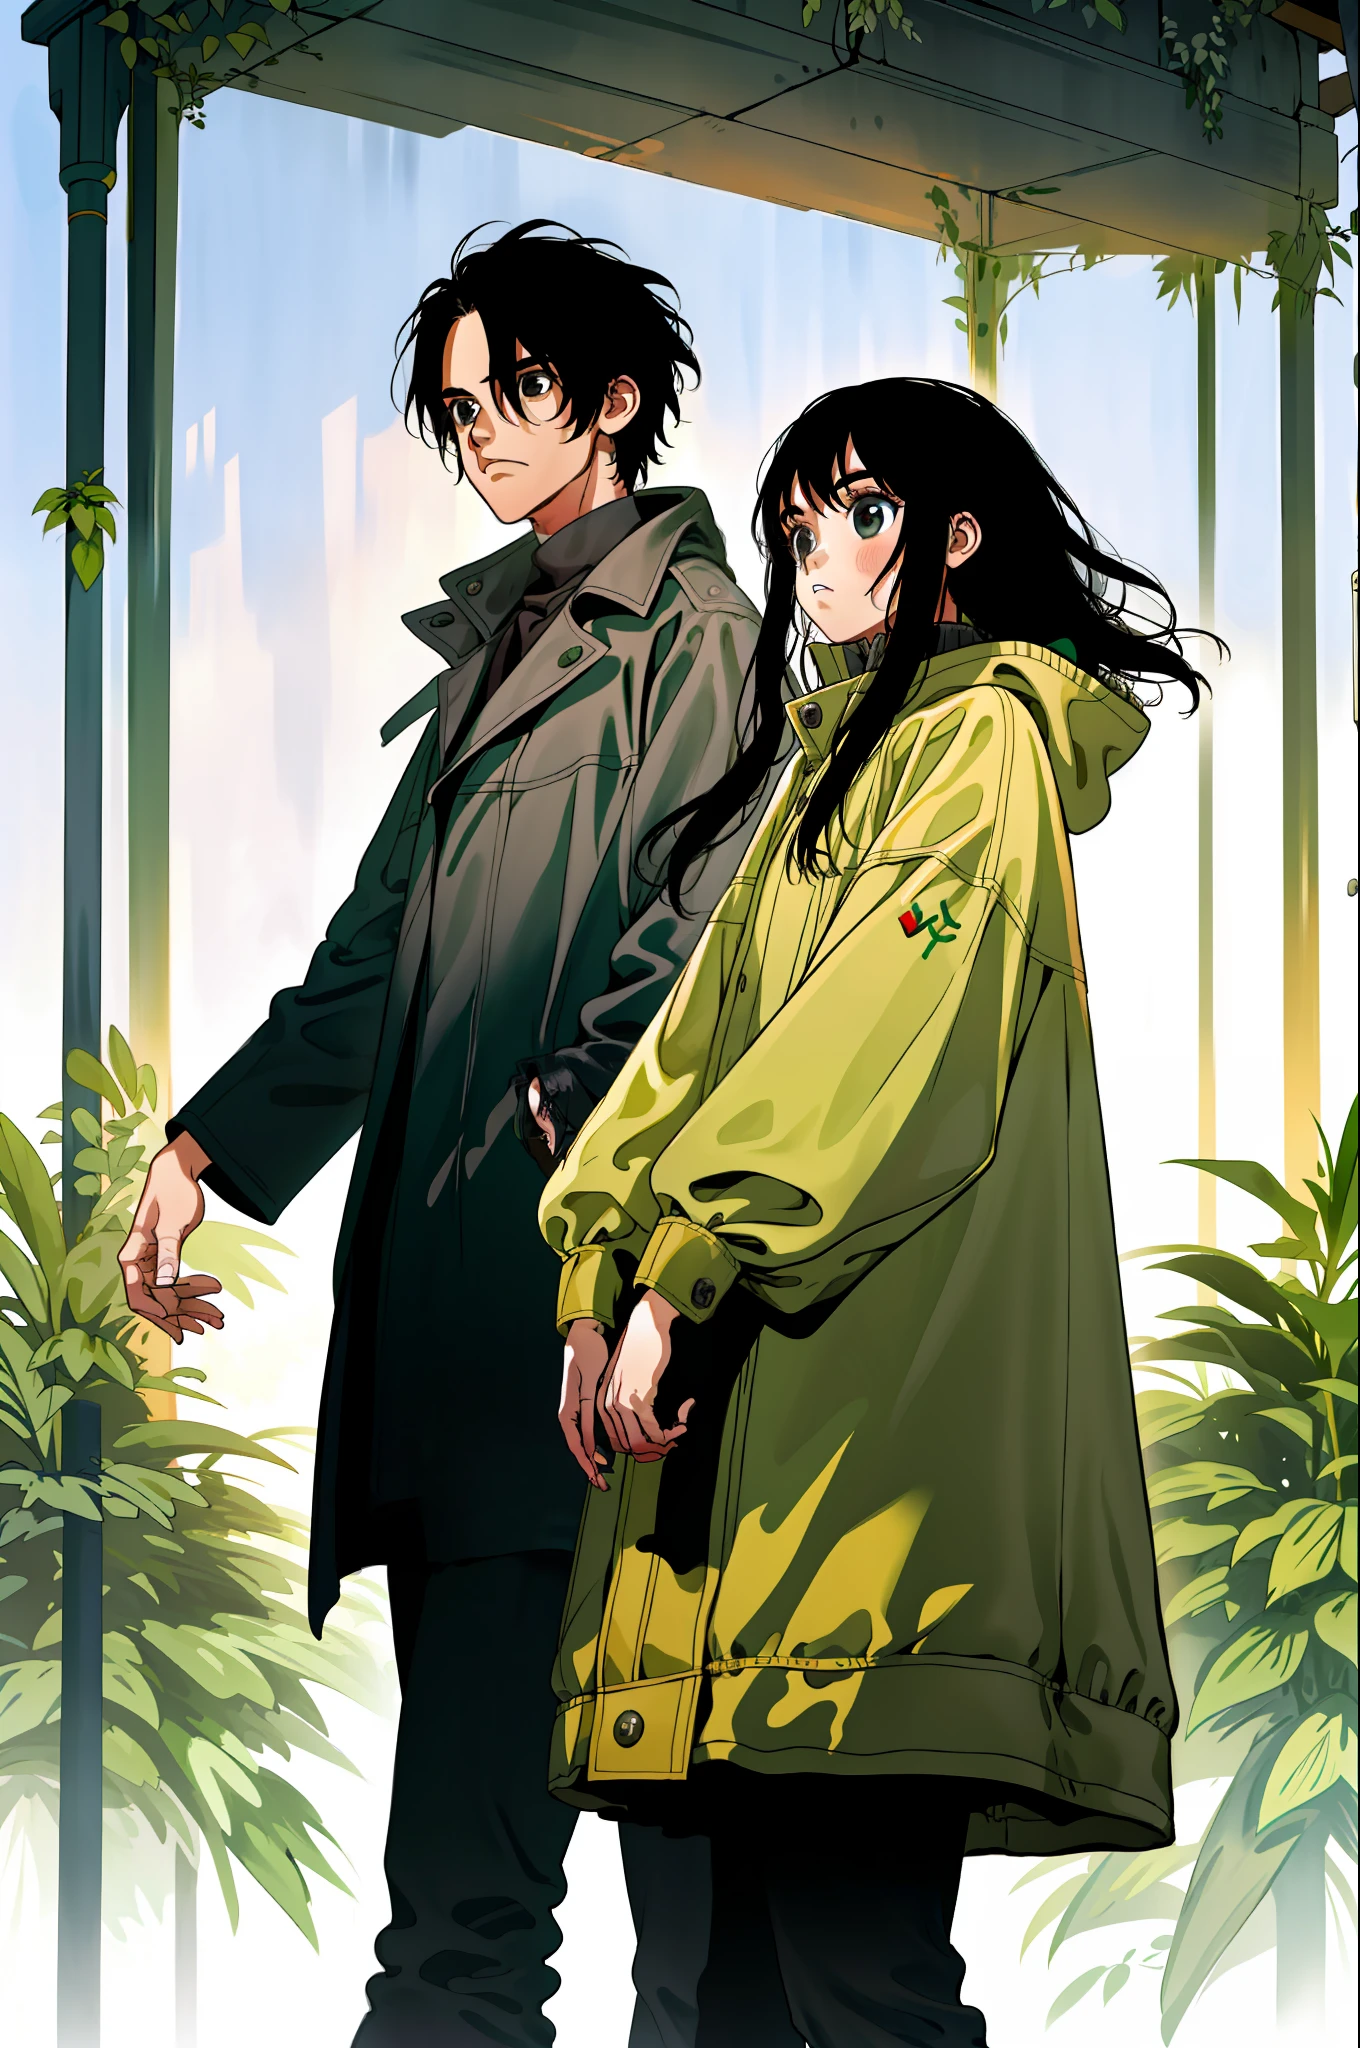 a young girl with long hair and in a cold coat and coxicol talking to a young tall boy with short hair and in a sweatshirt, a scene with a girl and a boy talking, a beautiful villa with lots of plants, high quality, lots of details